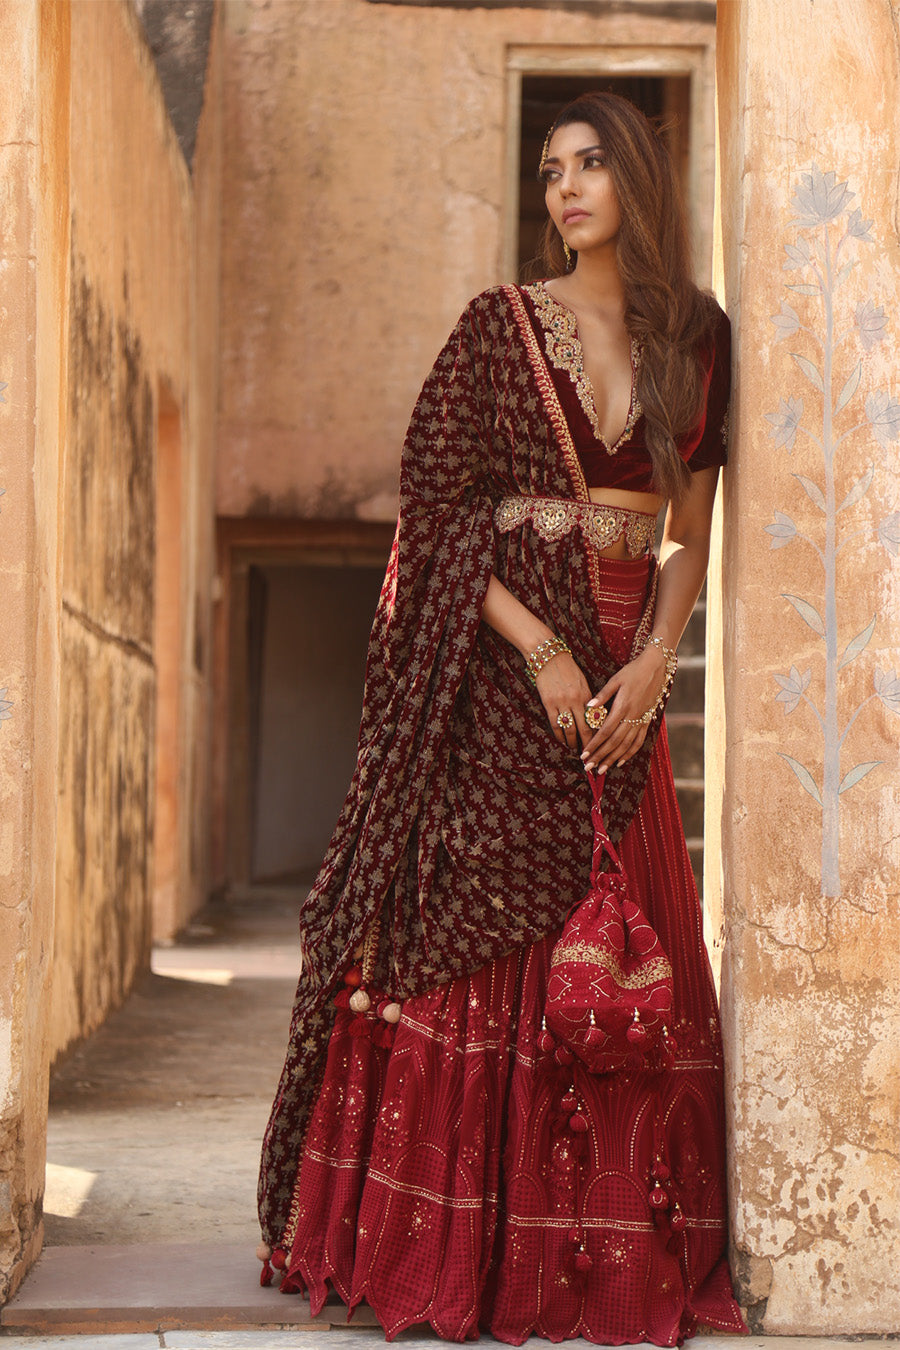 Lucknowi Chikankari Lehenga Matched With Velvet Blouse And Attched Duppatta And Potli